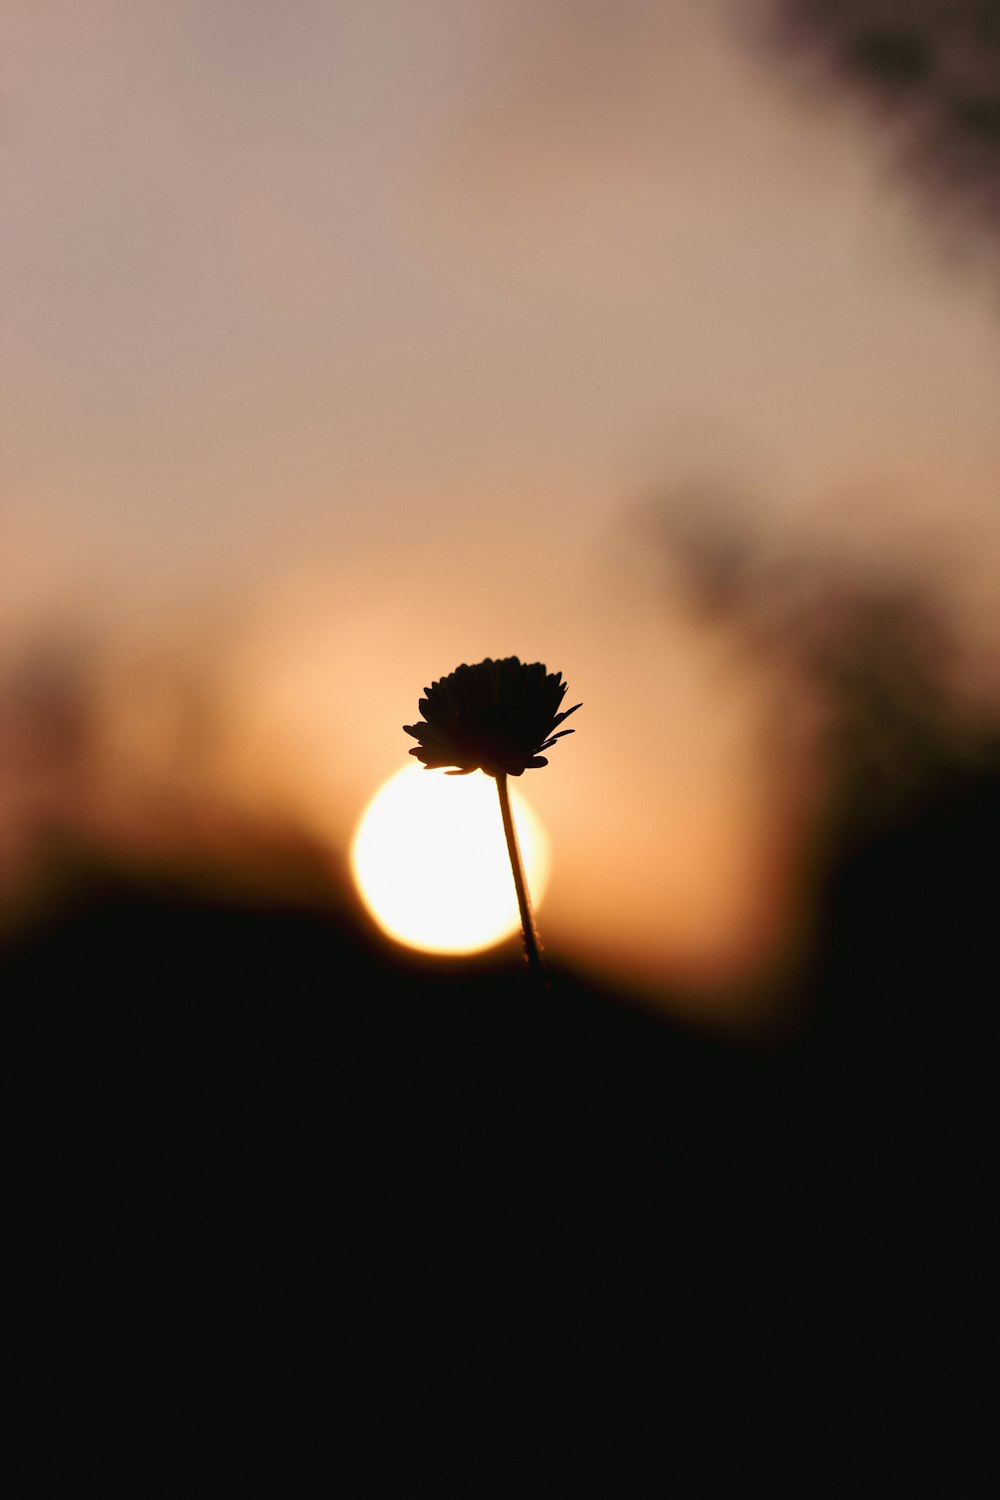 the sun is setting behind a single flower